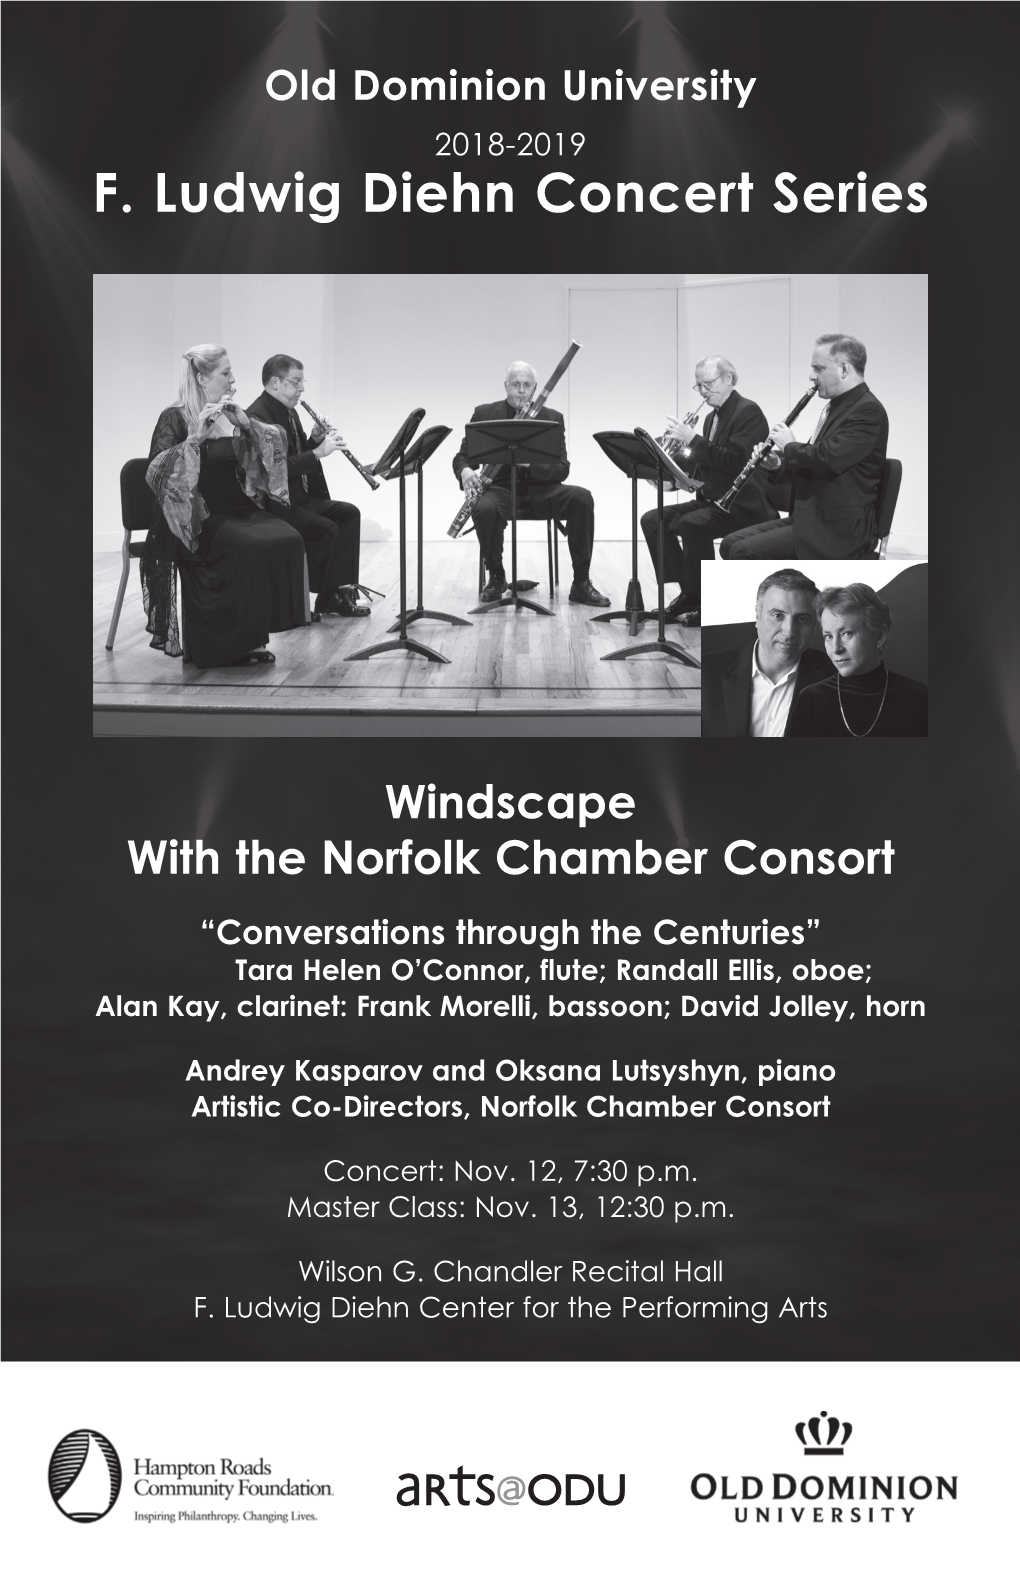 Windscape with the Norfolk Chamber Consort